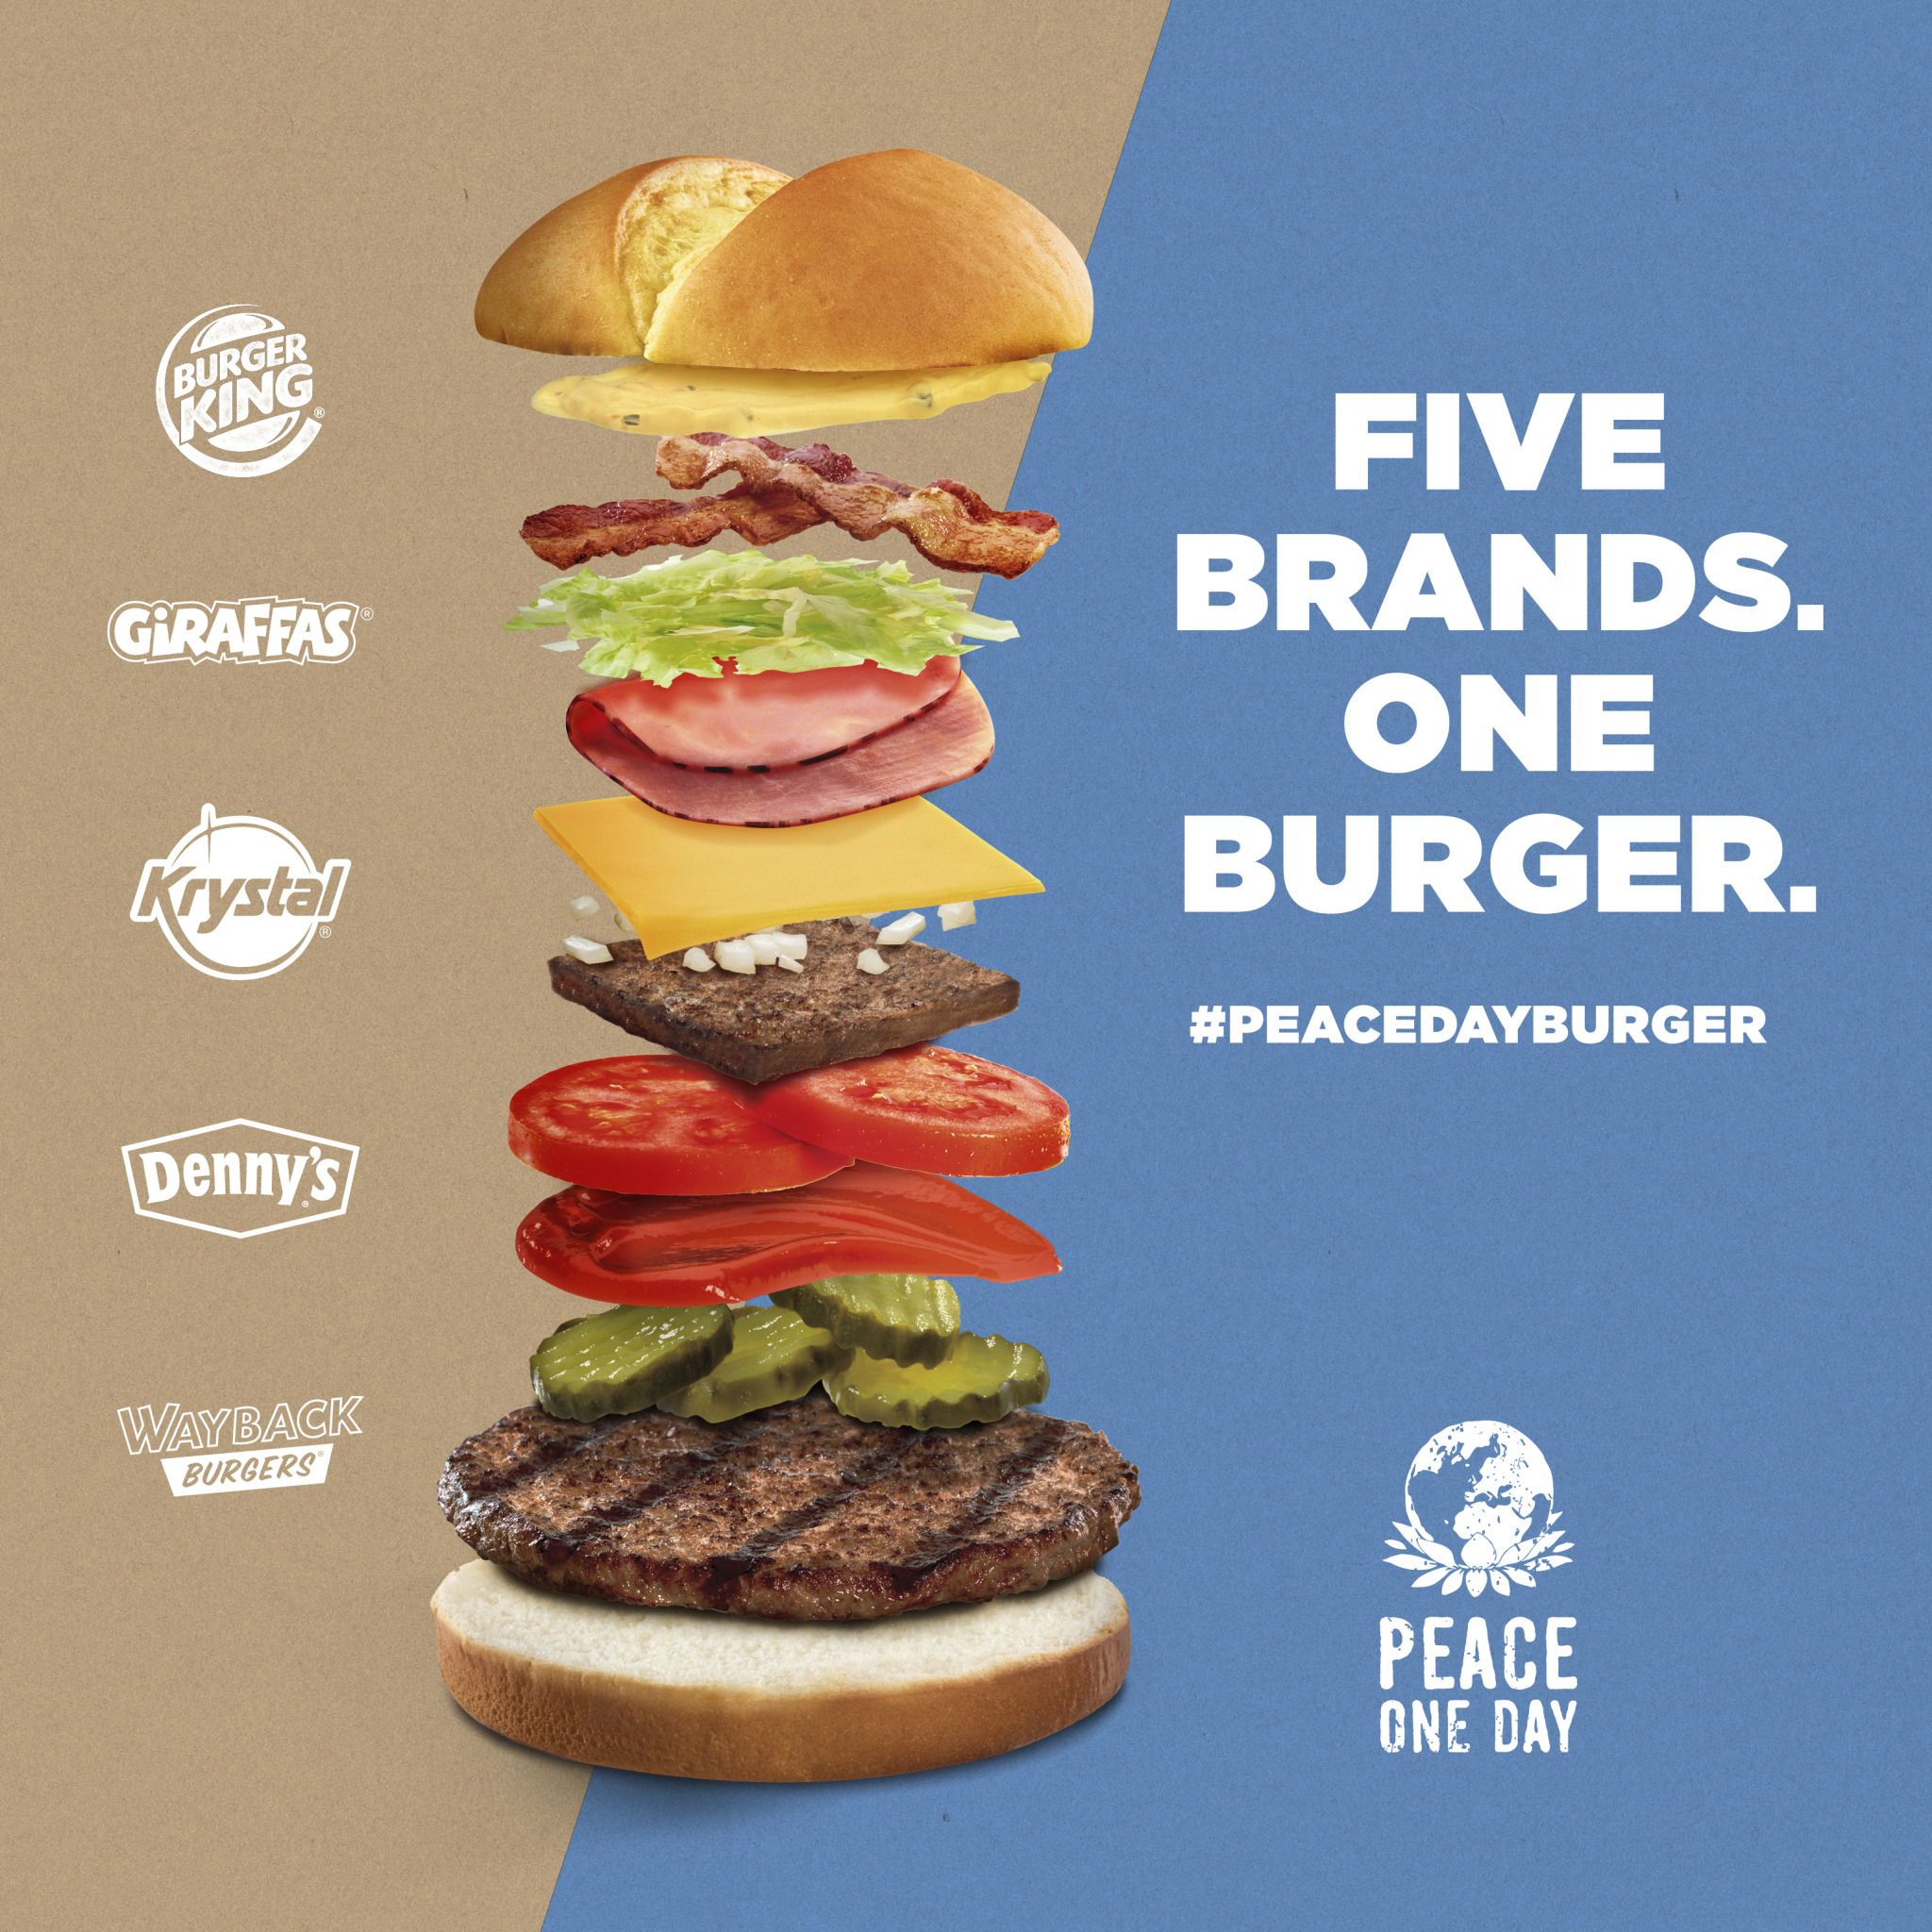 Burger King Teams With Denny’s, Krystal & Others To Create Peace Day Hybrid Burger